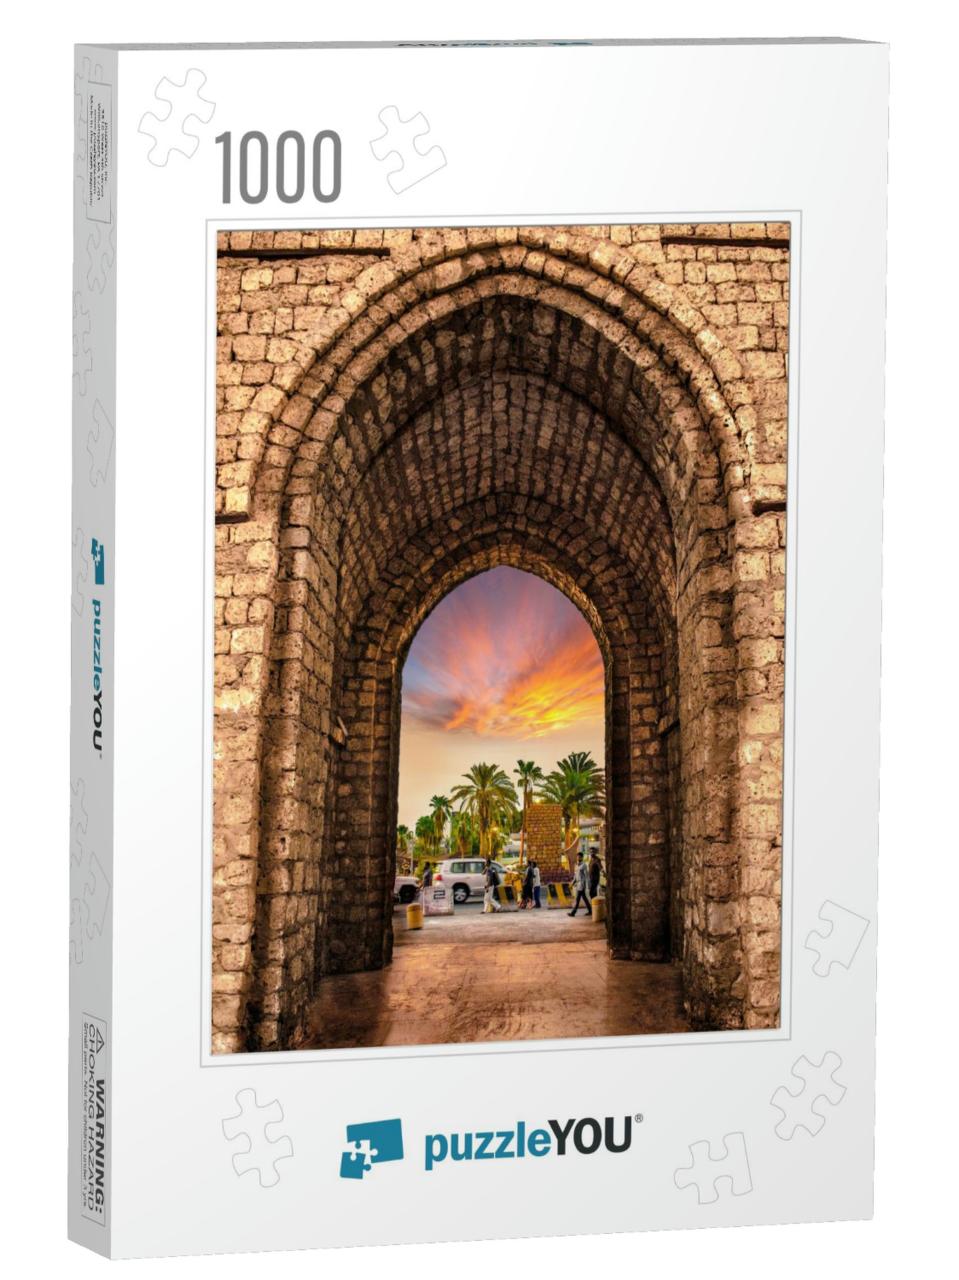 Makkah Gate is a Landmark of the City of Jeddah... Jigsaw Puzzle with 1000 pieces